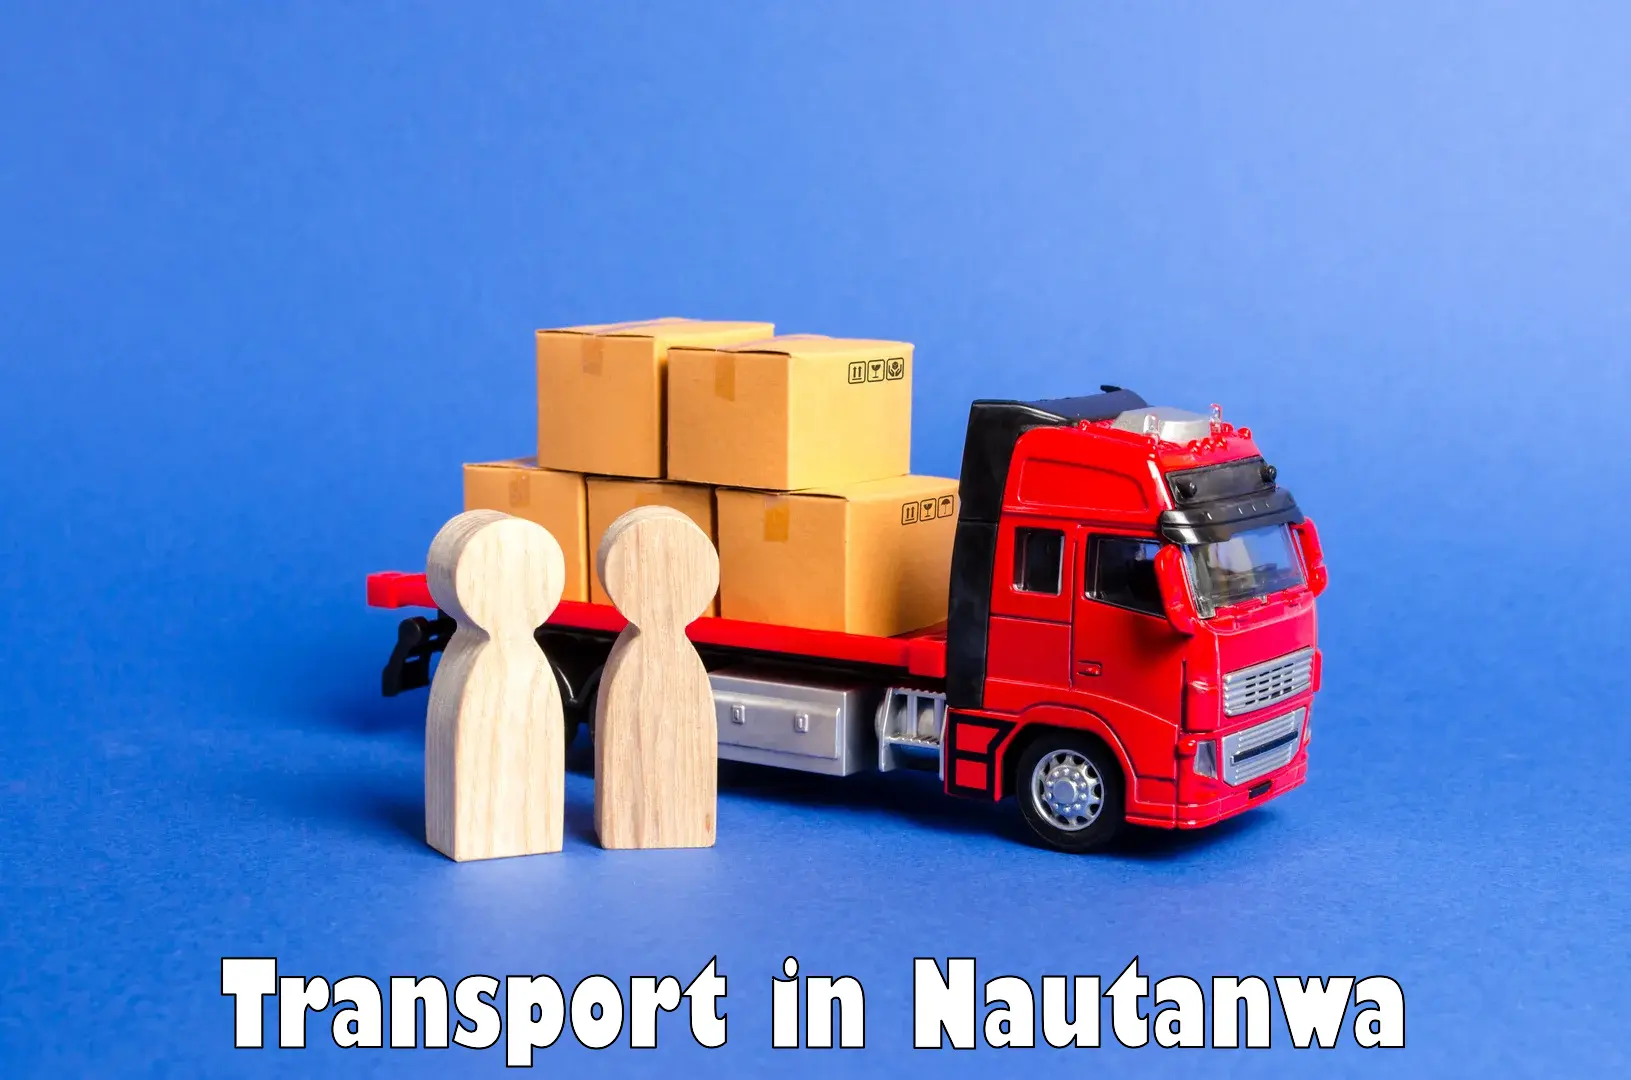 Road transport online services in Nautanwa